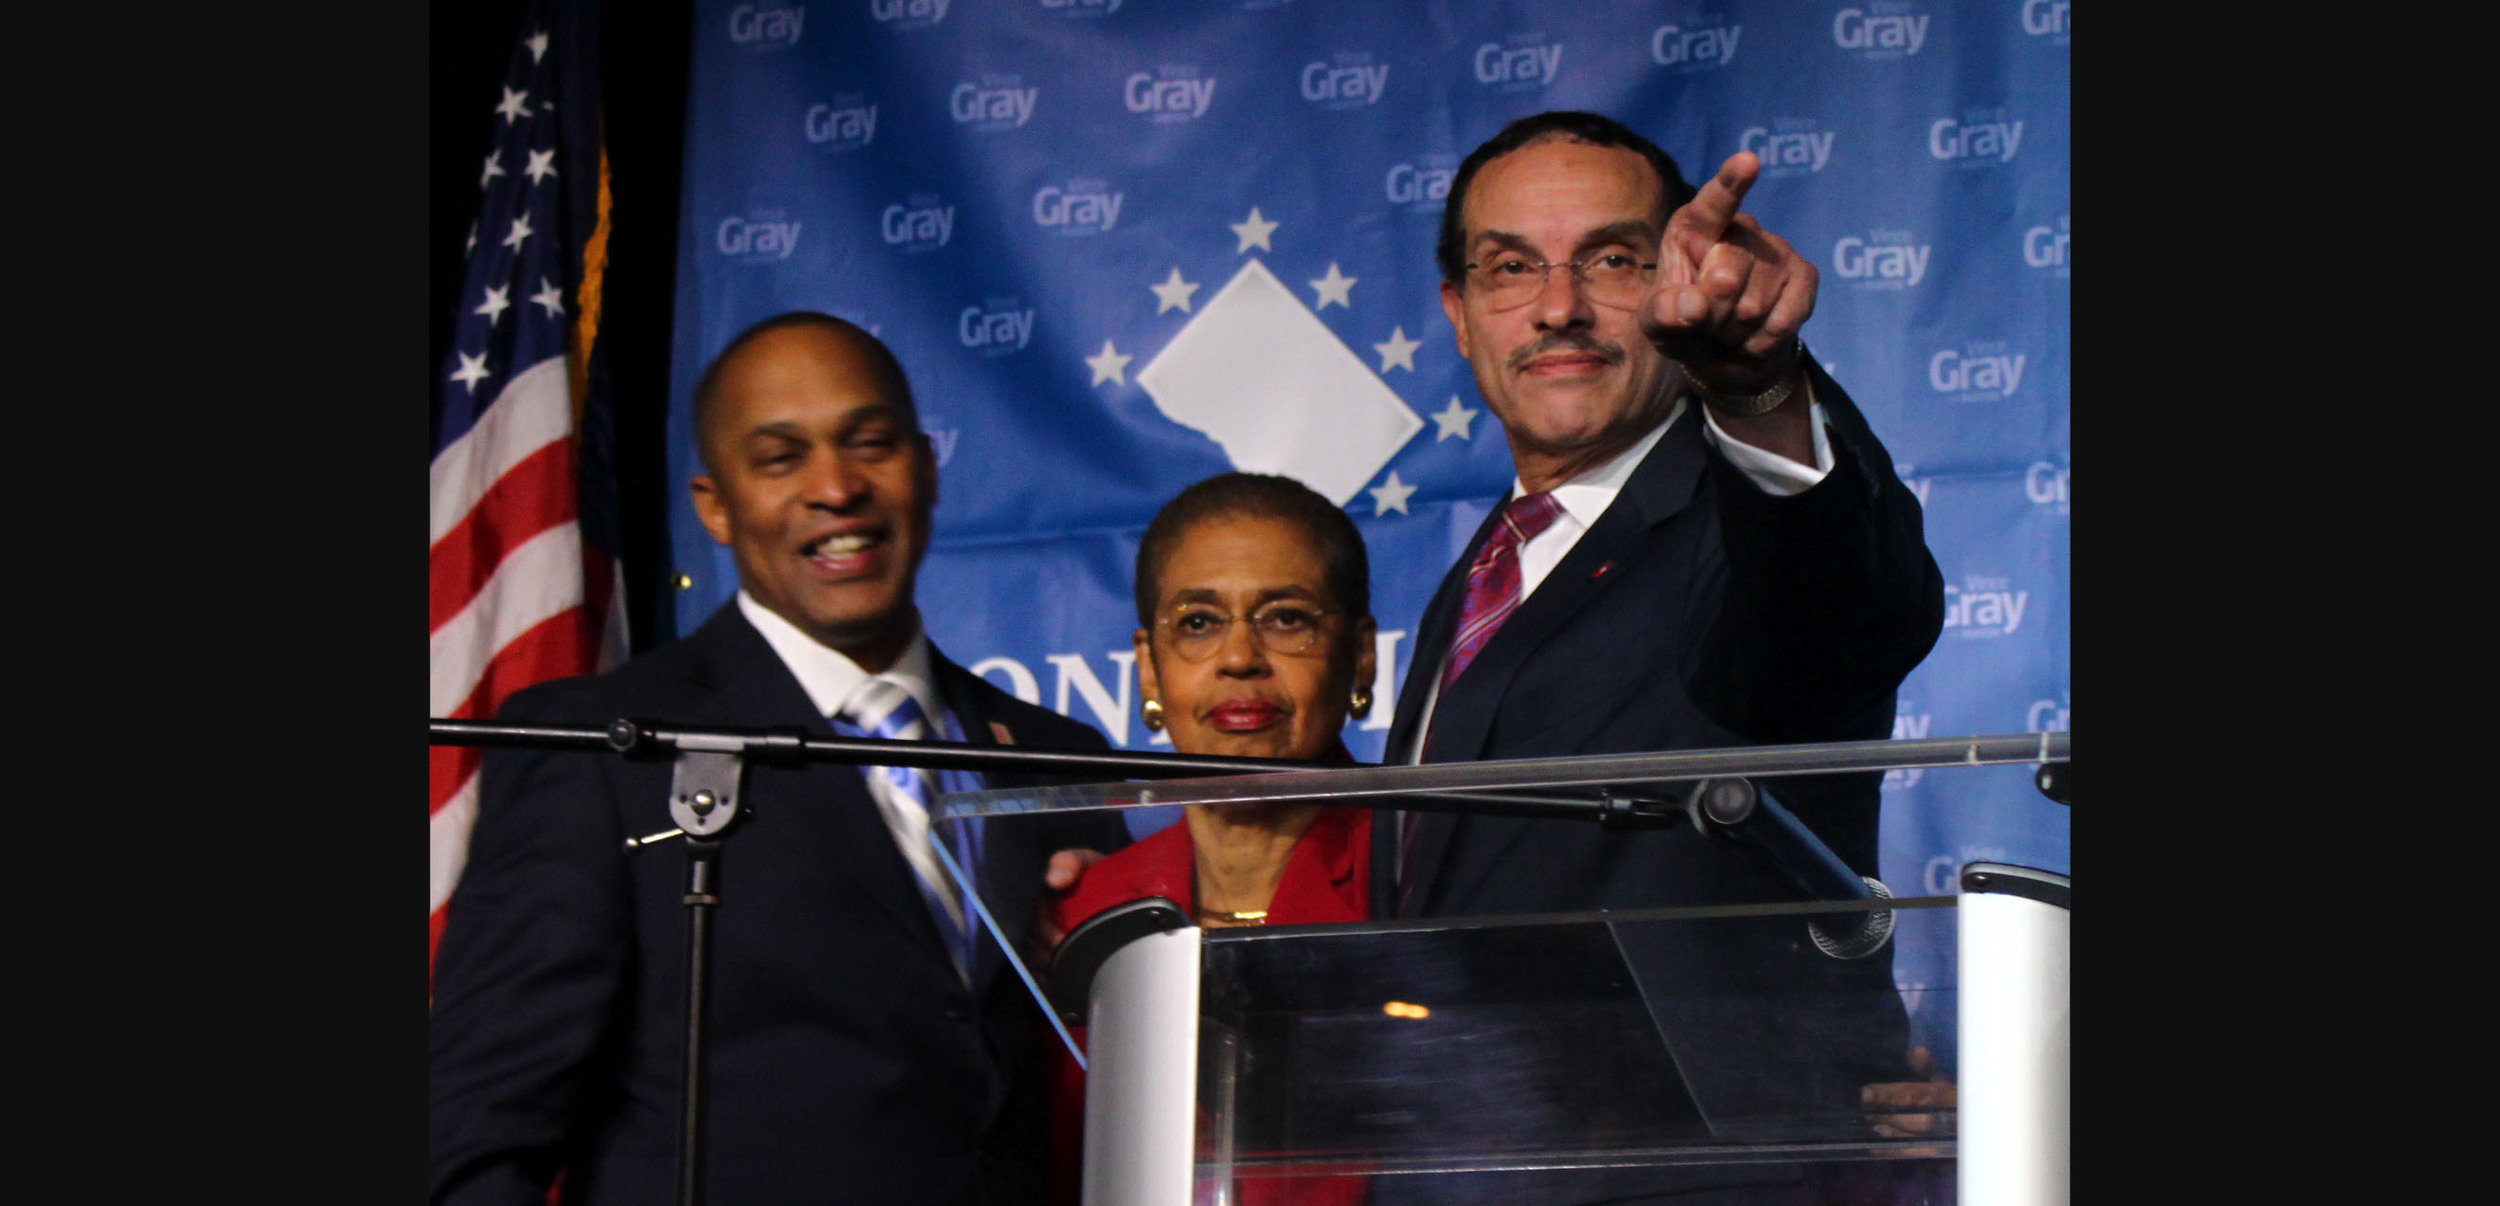 Election night in Washington, DC with Mayor Vince Gray, Council Chairman Kwame Brown, DC Congresswoman Eleanor Holmes Norton